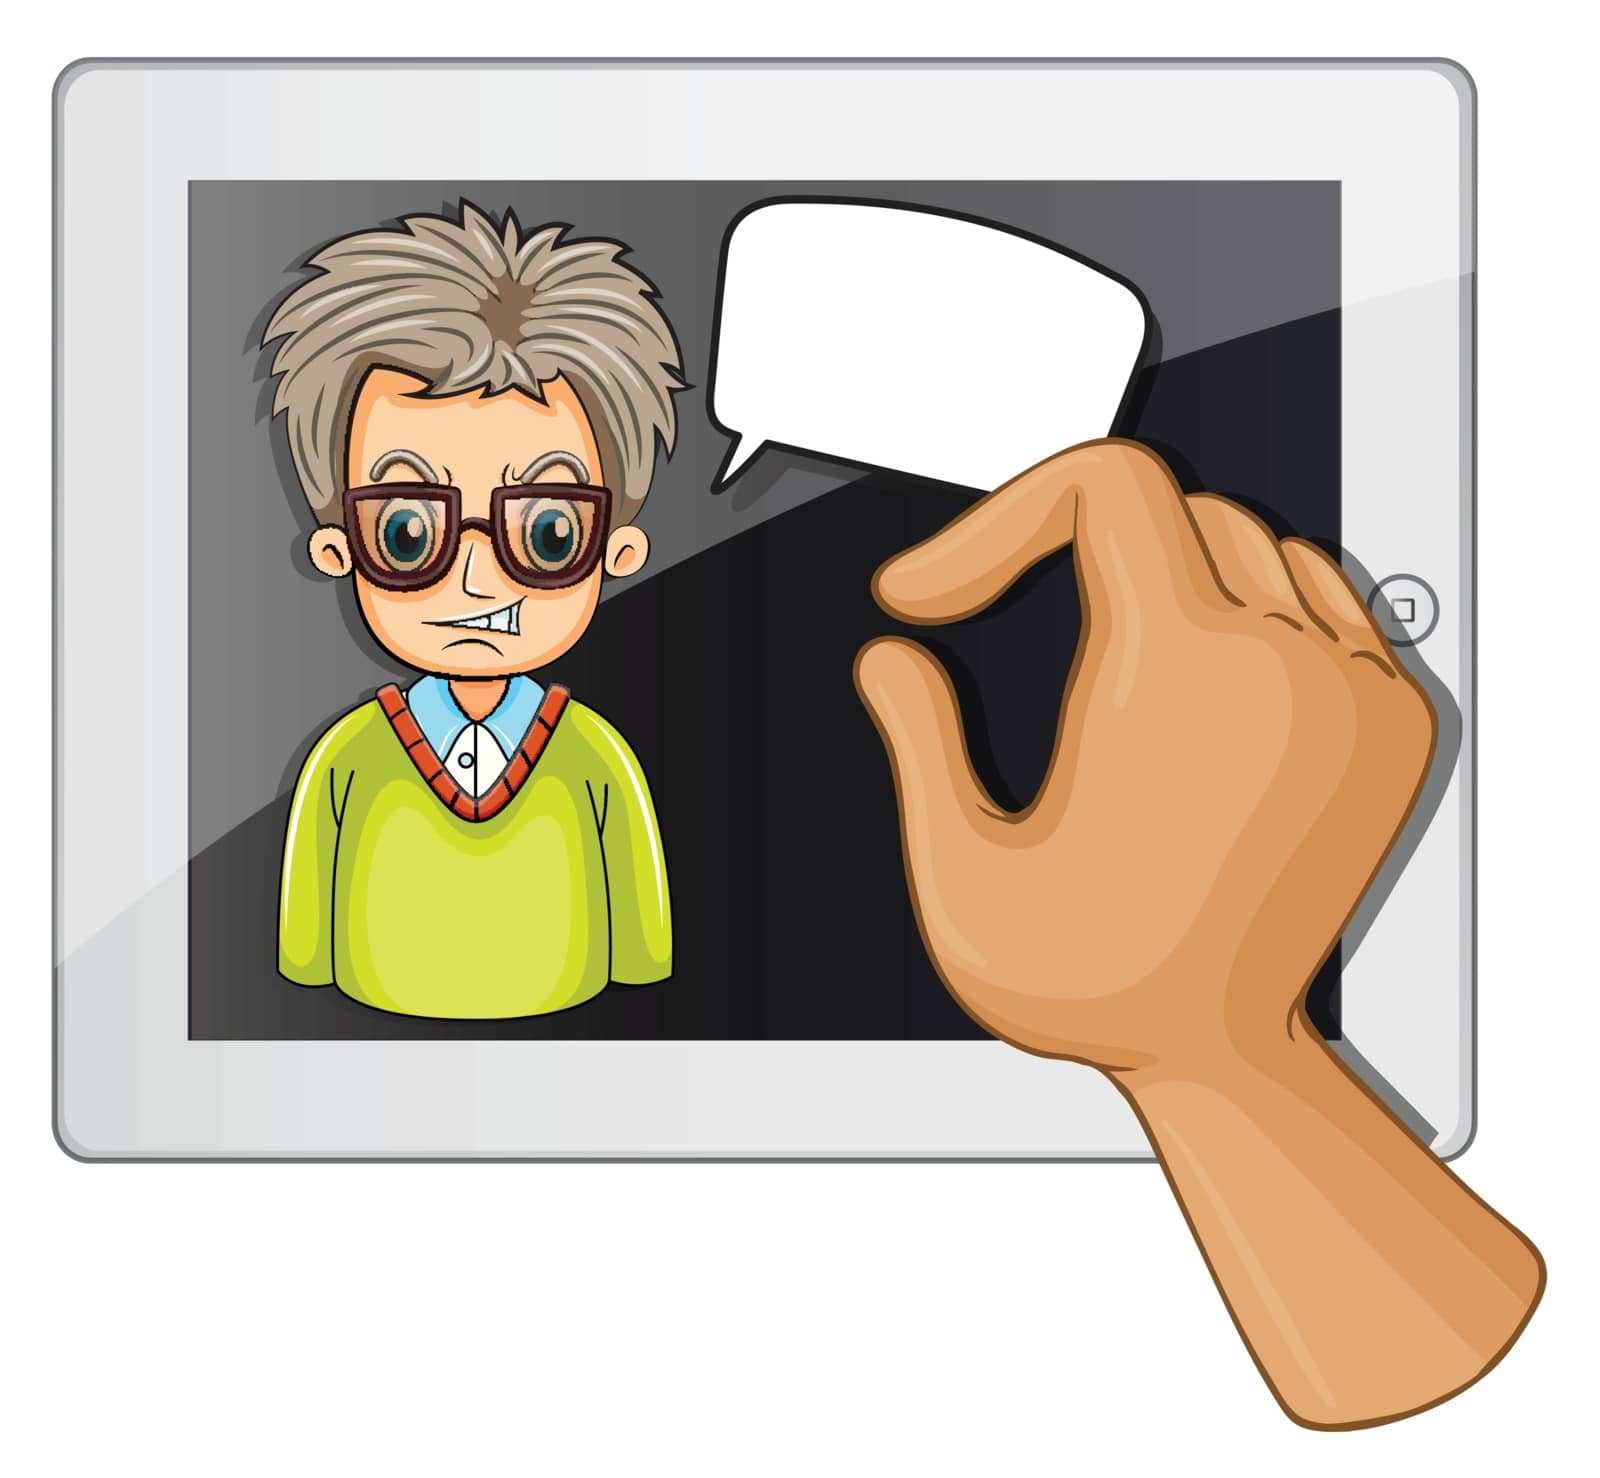 Illustration of a man inside the gadget with a rectangular callout on a white background